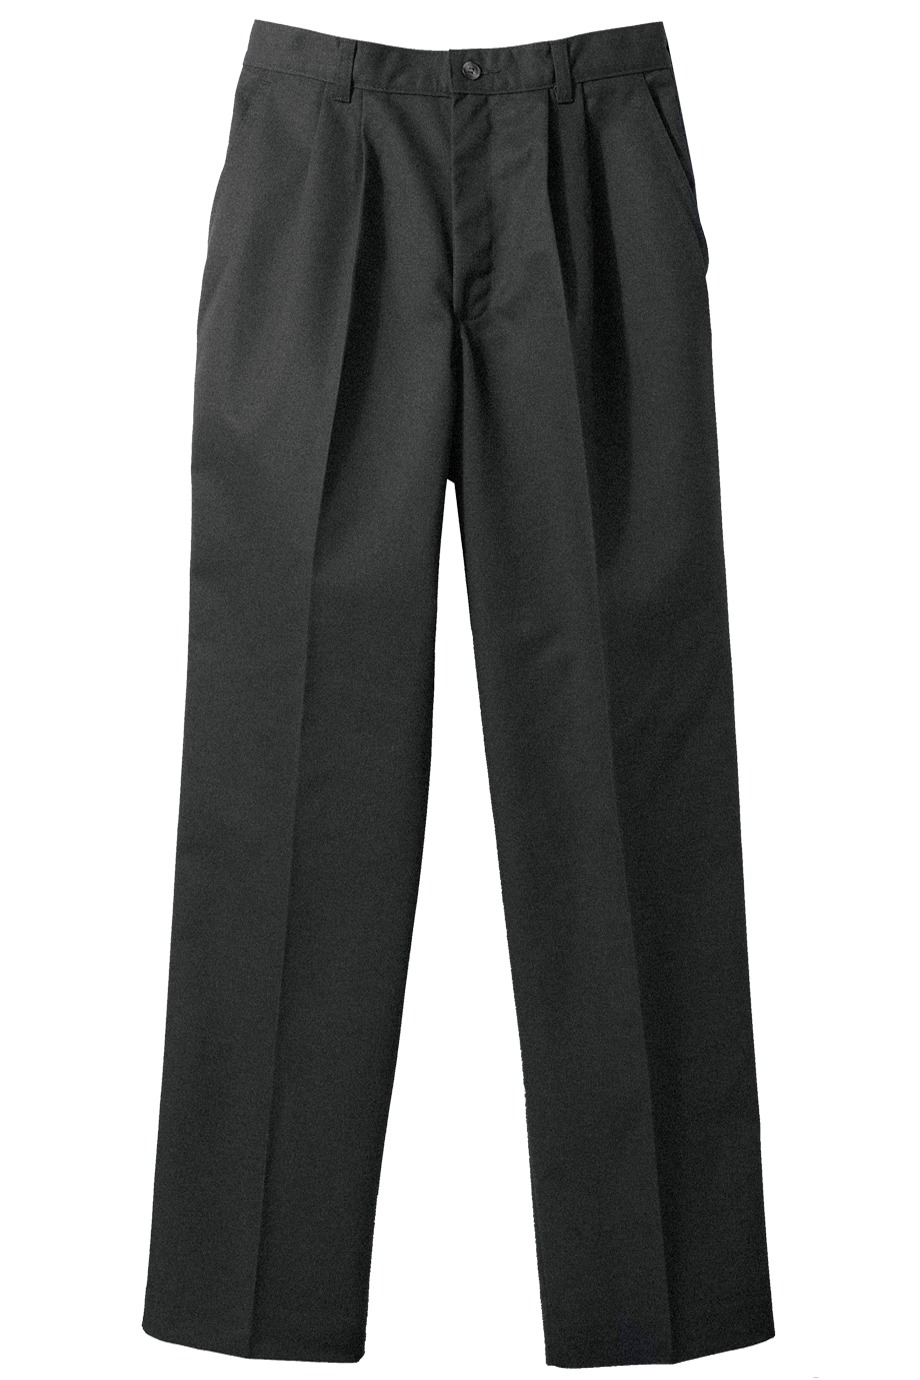 Edward's Women's Pleated Front Blended Chino Pants